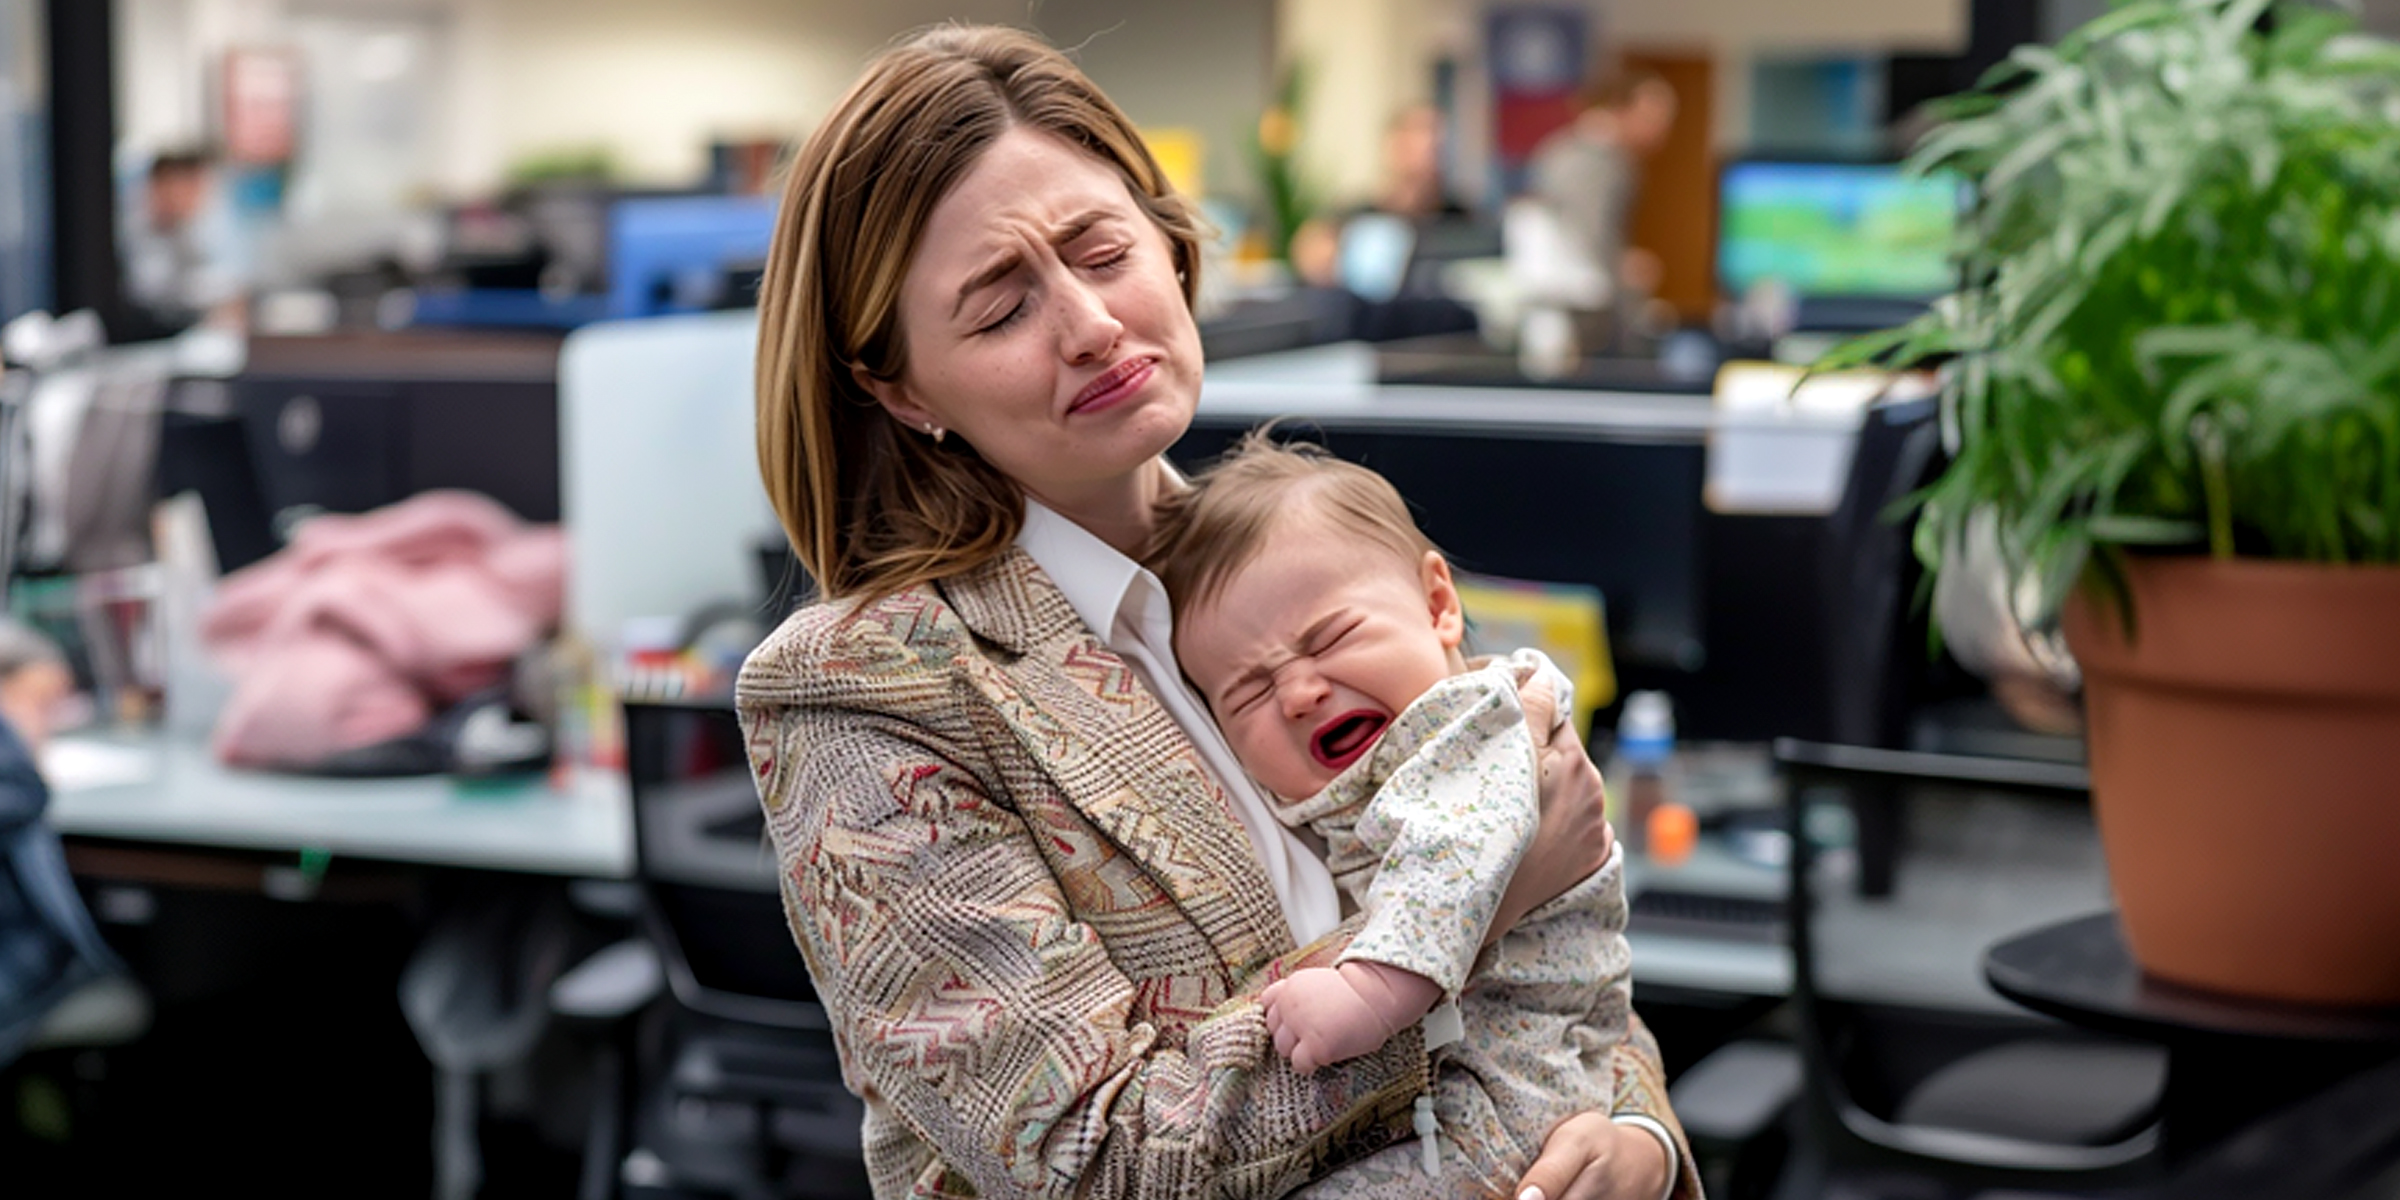 An office worker trying to calm a crying baby | Source: Amomama